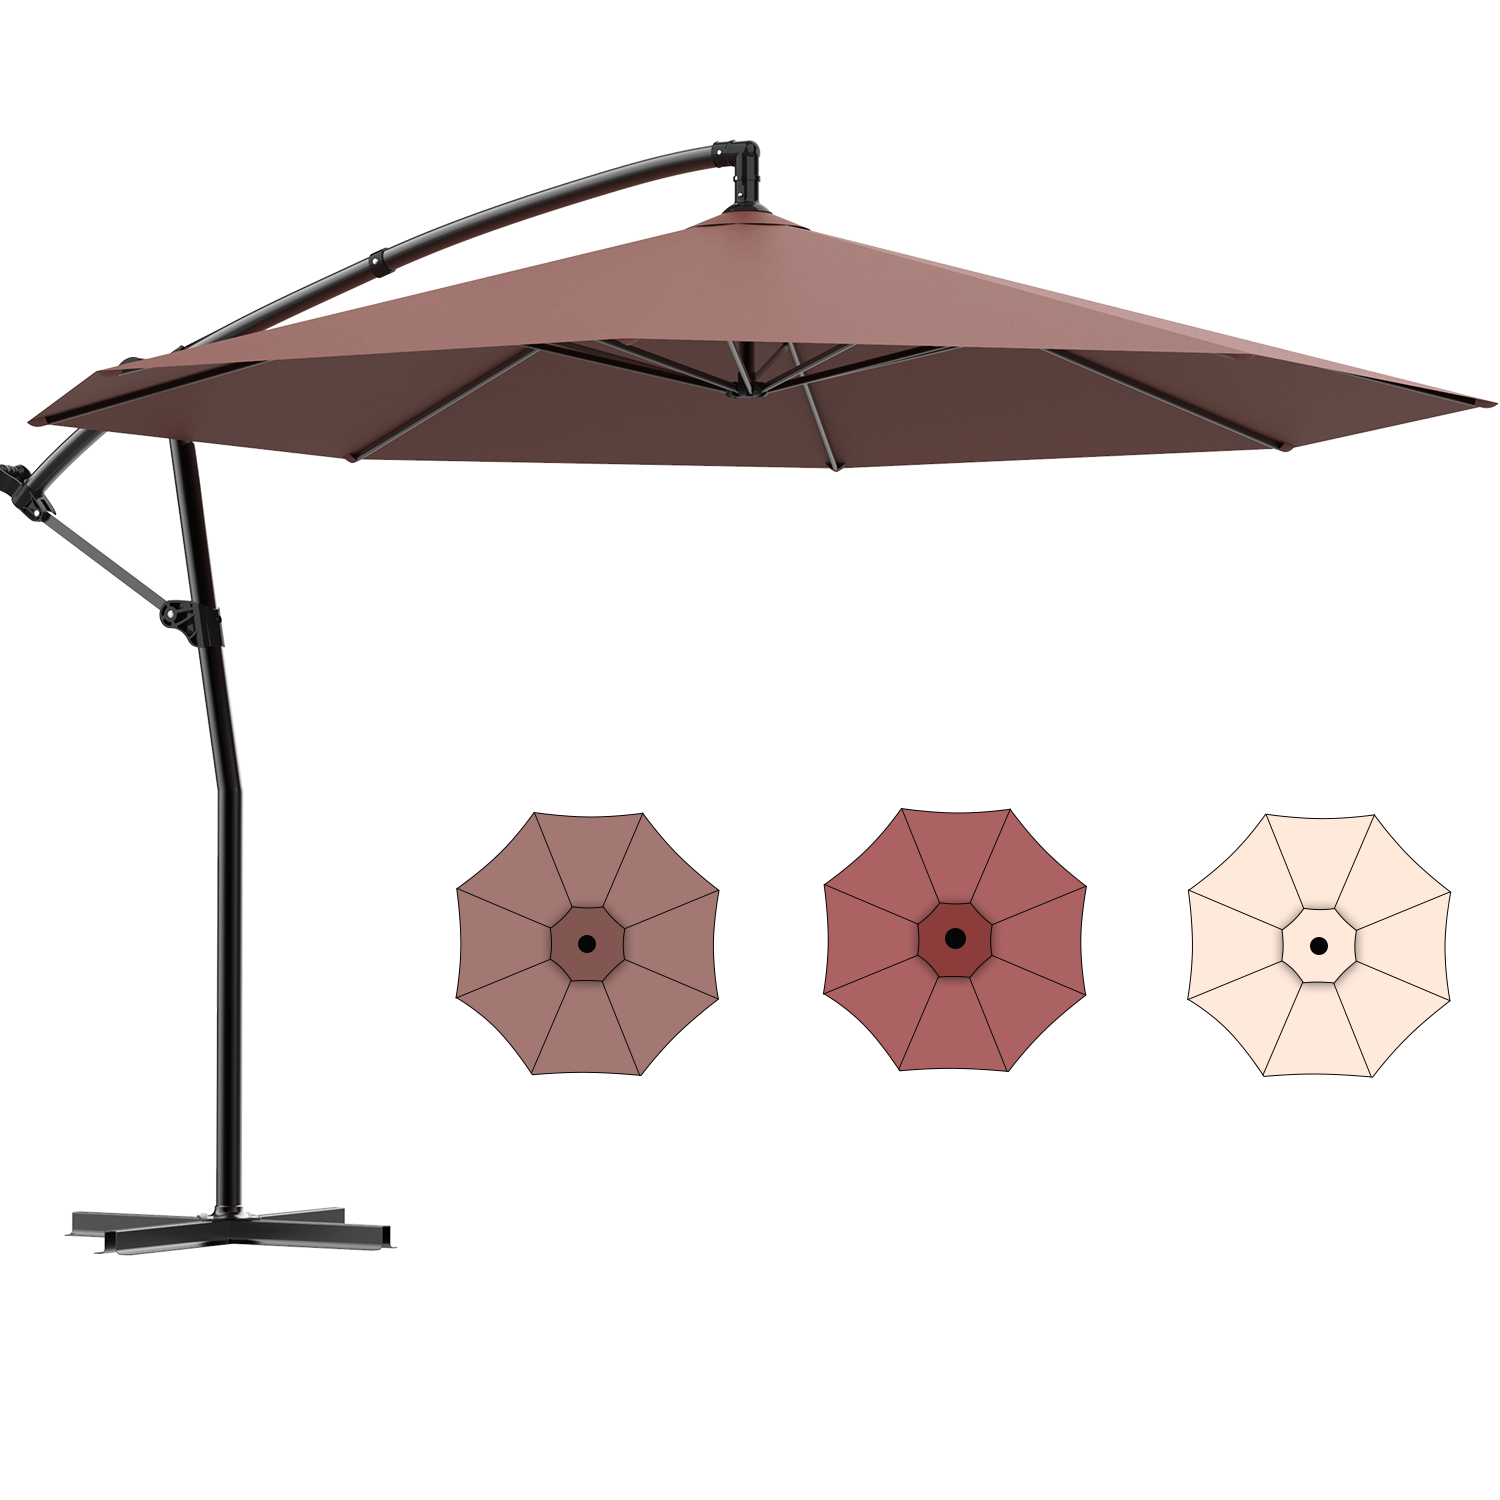 How to Restring a Patio Umbrella? – Lausaint Home